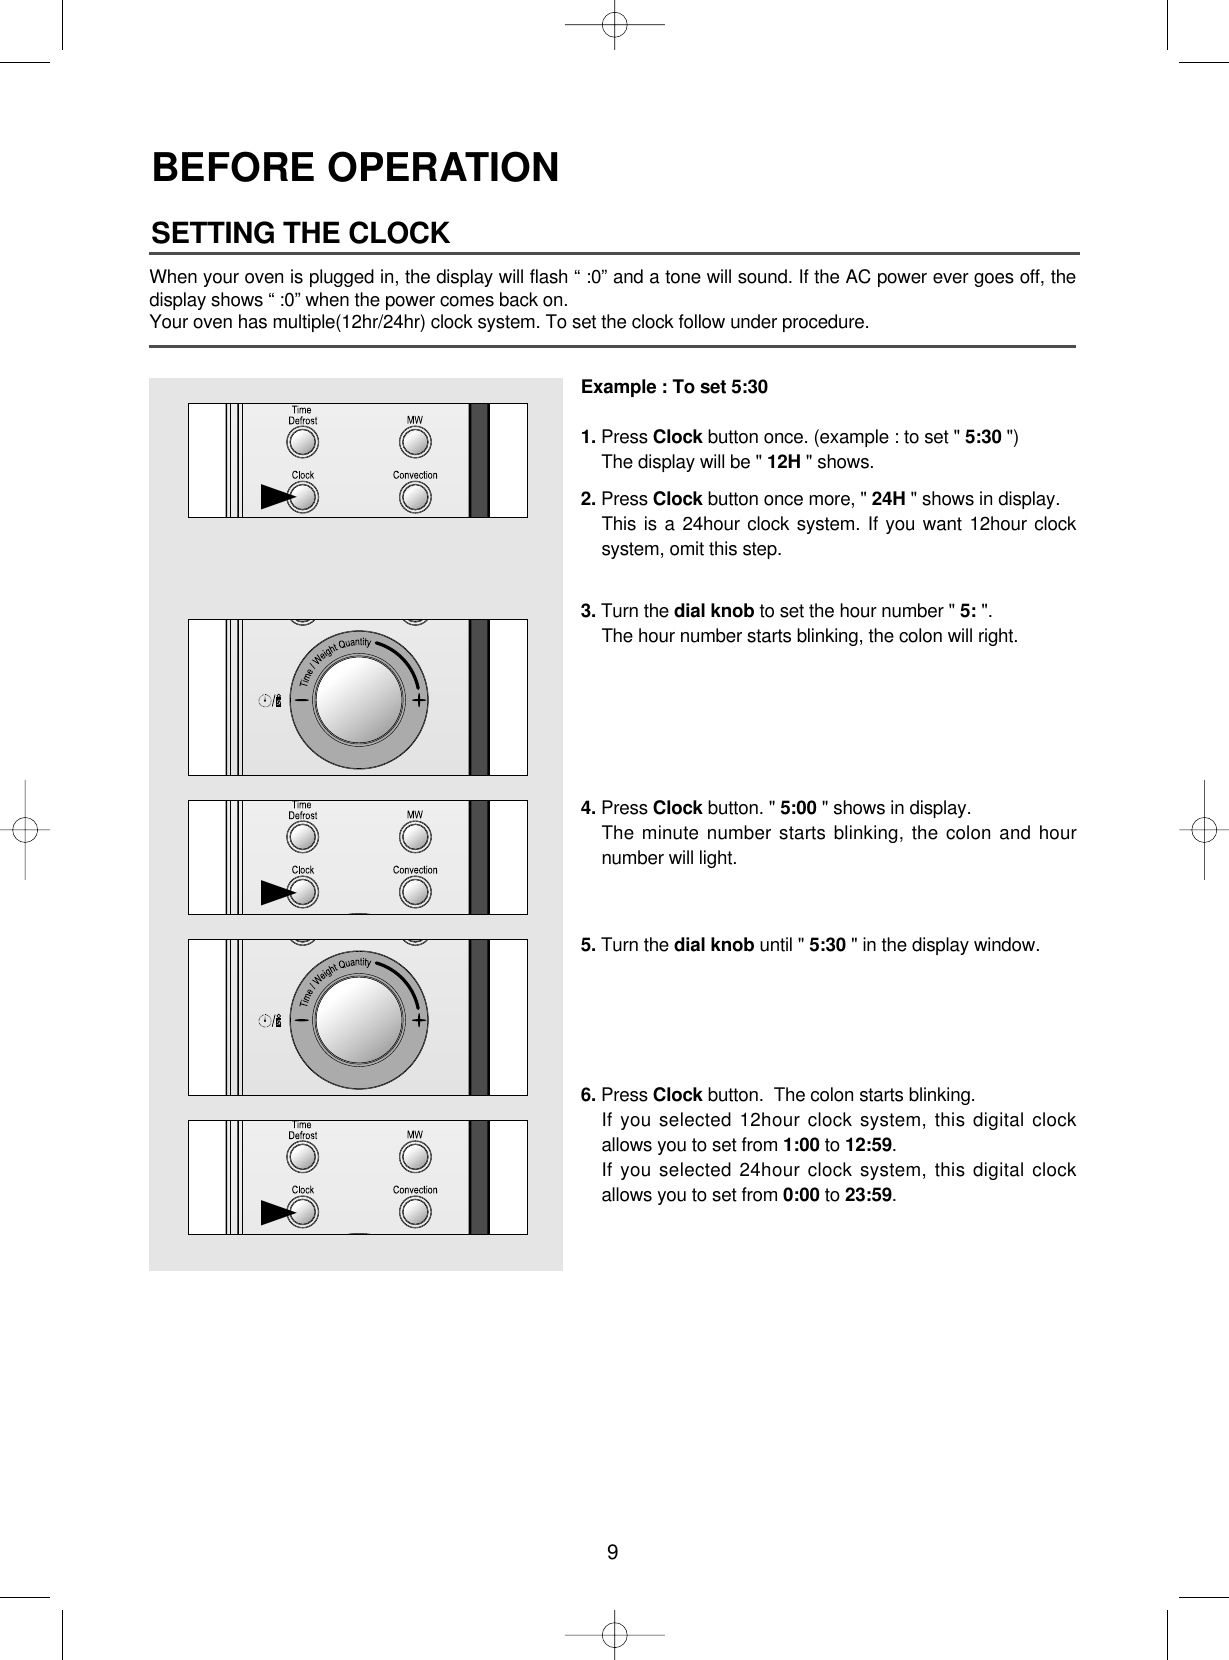 9BEFORE OPERATIONWhen your oven is plugged in, the display will flash “ :0” and a tone will sound. If the AC power ever goes off, thedisplay shows “ :0” when the power comes back on.Your oven has multiple(12hr/24hr) clock system. To set the clock follow under procedure.Example : To set 5:301. Press Clock button once. (example : to set &quot; 5:30 &quot;)The display will be &quot; 12H &quot; shows.2. Press Clock button once more, &quot; 24H &quot; shows in display.This is a 24hour clock system. If you want 12hour clocksystem, omit this step.3. Turn the dial knob to set the hour number &quot; 5: &quot;.The hour number starts blinking, the colon will right.4. Press Clock button. &quot; 5:00 &quot; shows in display.The minute number starts blinking, the colon and hournumber will light.5. Turn the dial knob until &quot; 5:30 &quot; in the display window.6. Press Clock button.  The colon starts blinking.If you selected 12hour clock system, this digital clockallows you to set from 1:00 to 12:59.If you selected 24hour clock system, this digital clockallows you to set from 0:00 to 23:59.SETTING THE CLOCK ▲▲▲